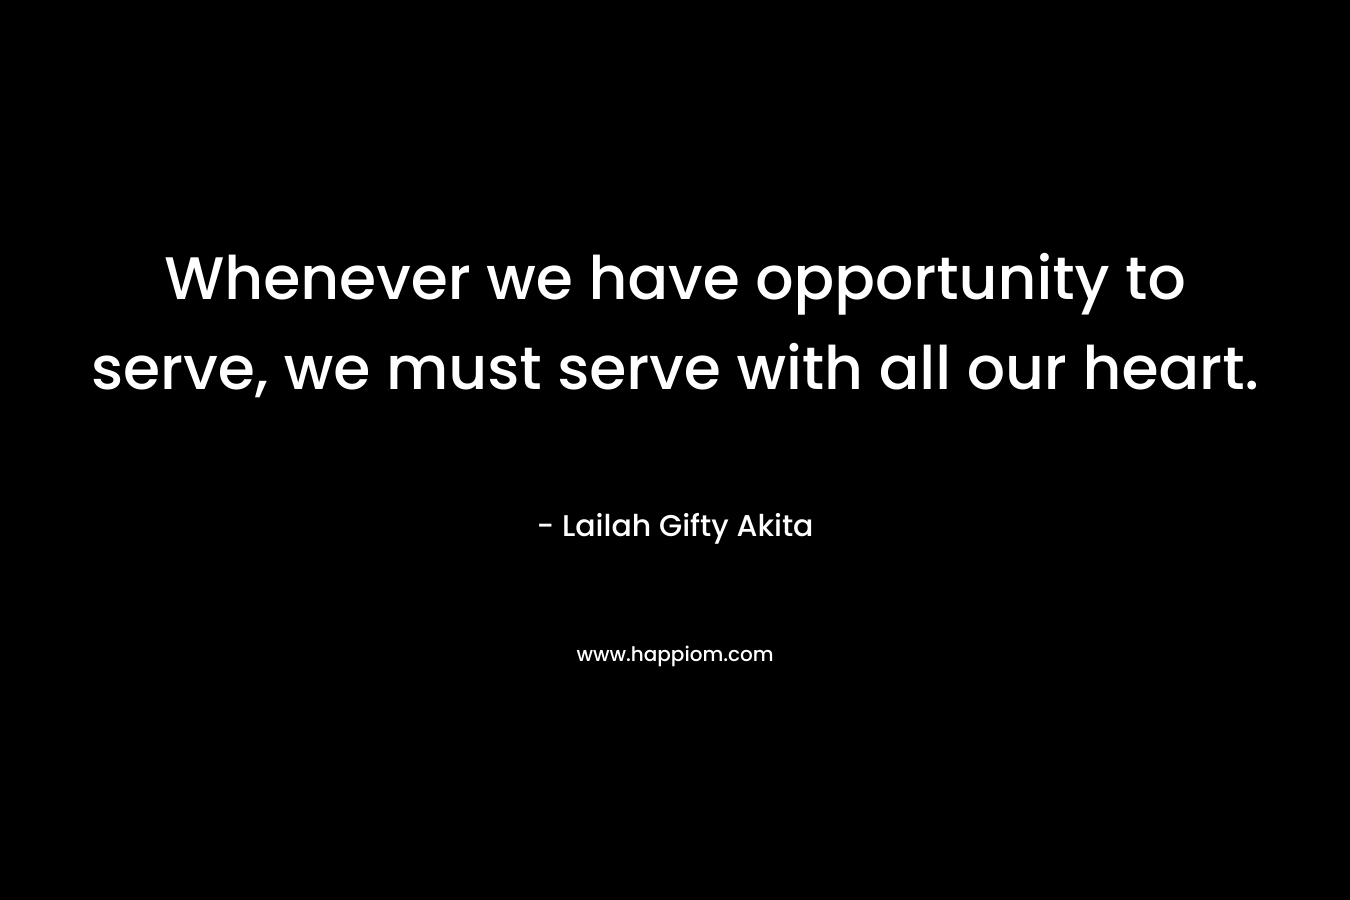 Whenever we have opportunity to serve, we must serve with all our heart. – Lailah Gifty Akita